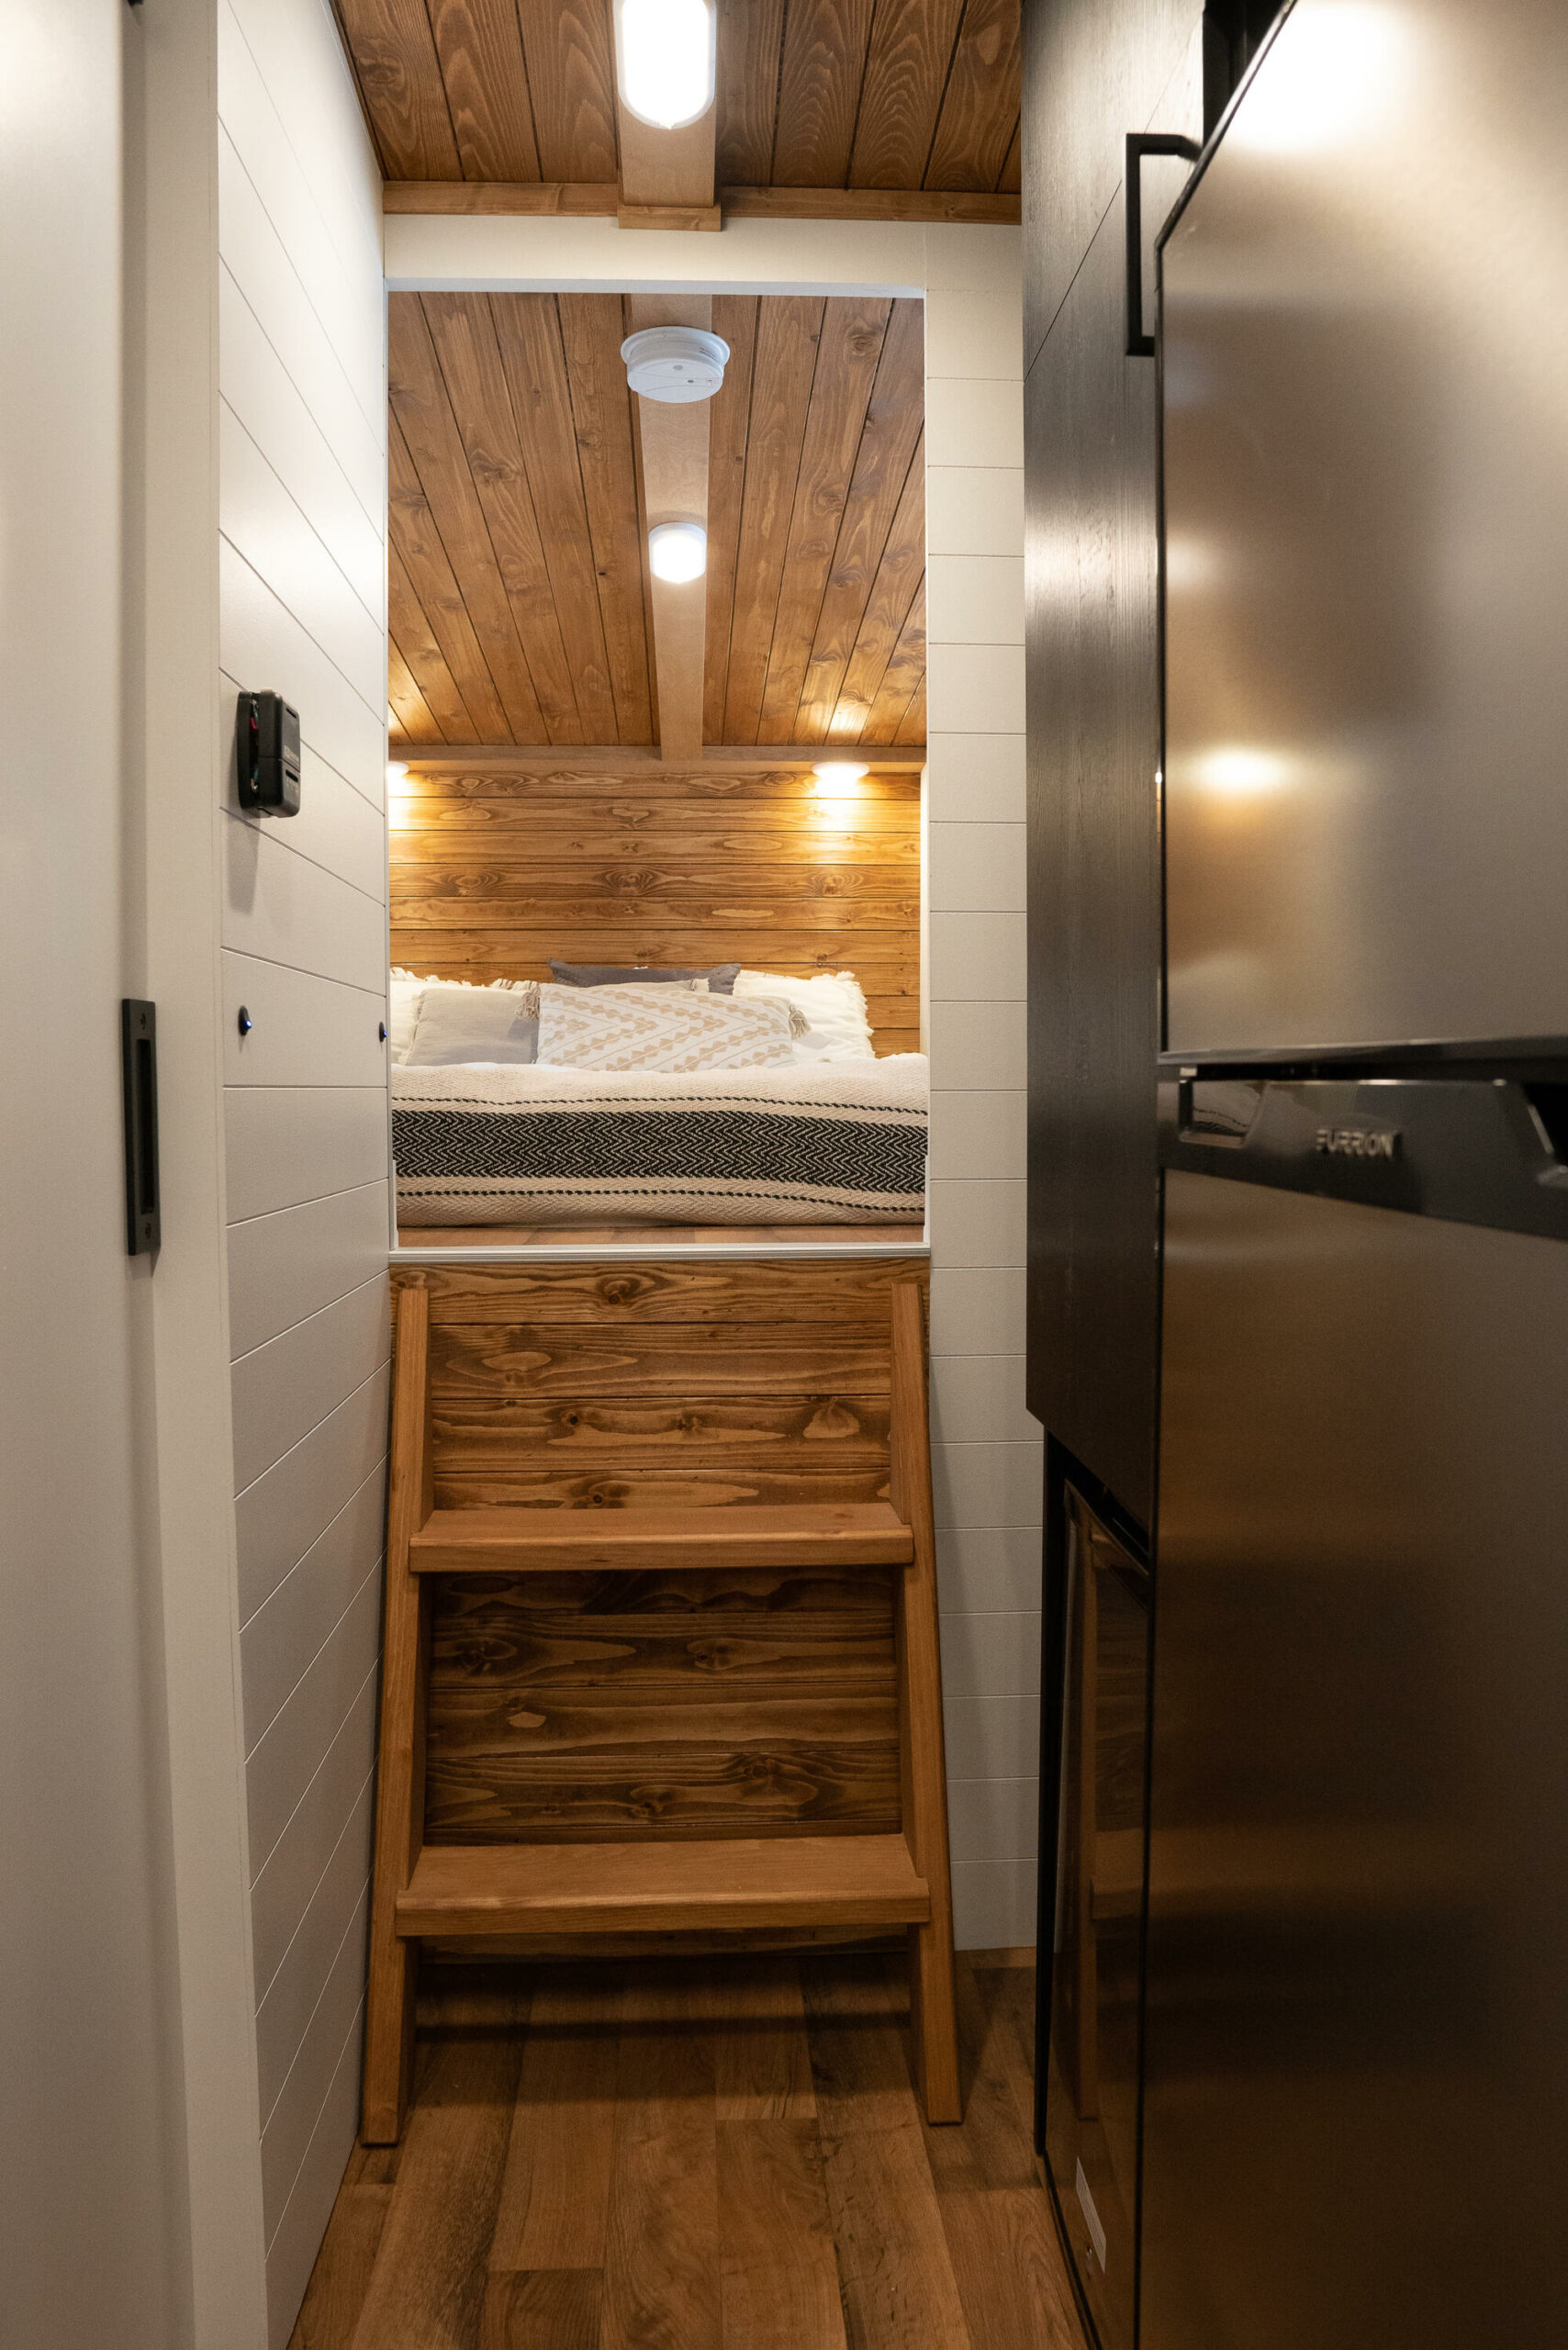 Stairs to Bedroom - Nomad 5th Wheel by Minimaliste